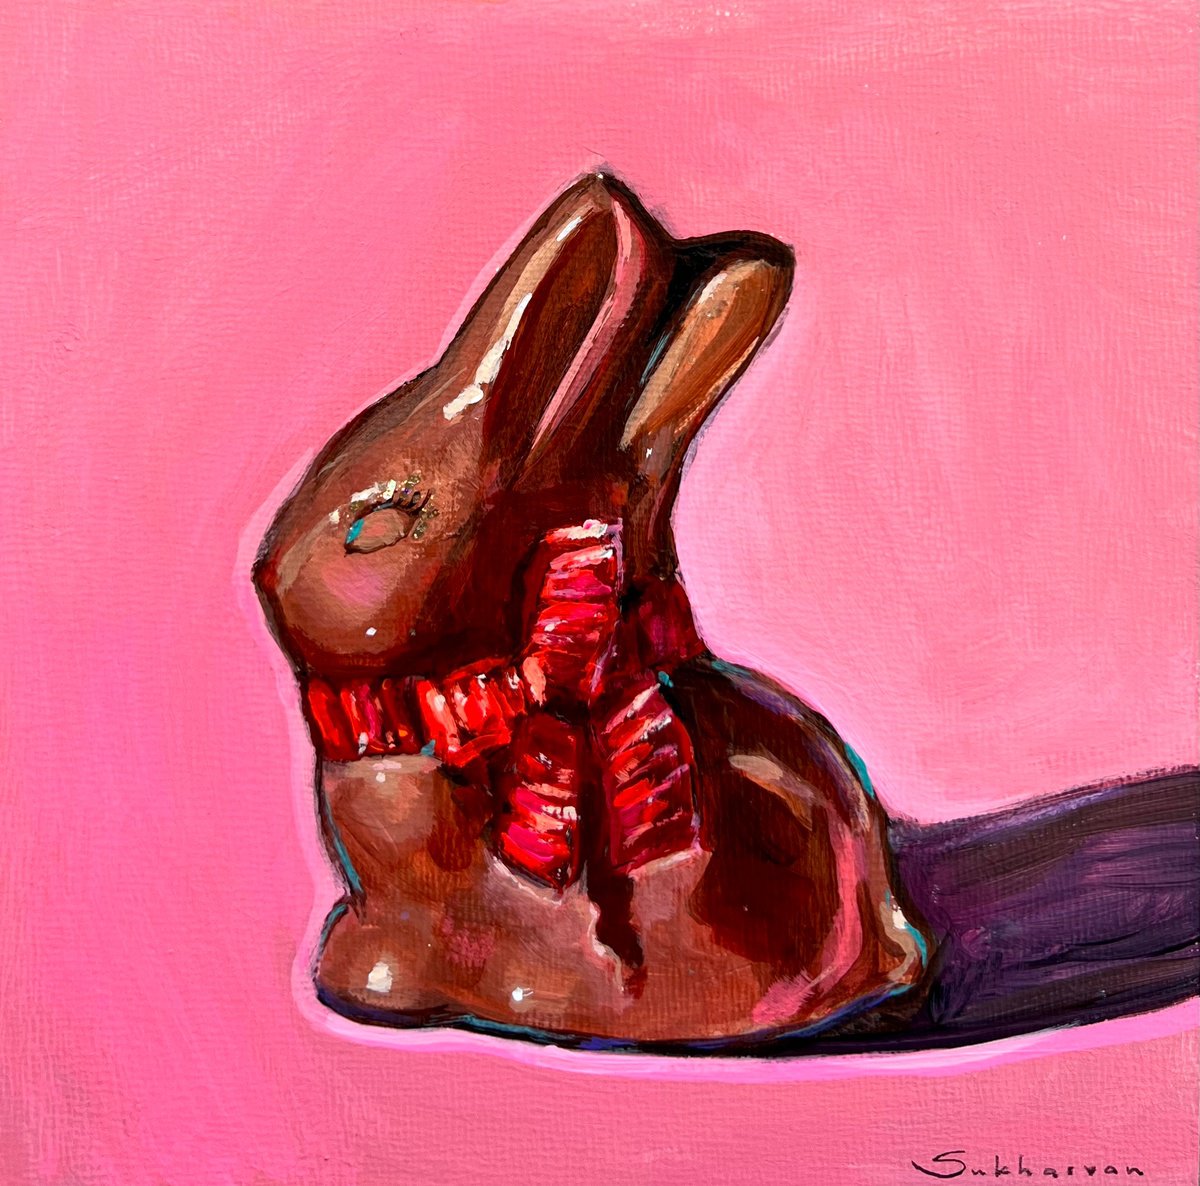 Still Life with Chocolate Bunny by Victoria Sukhasyan